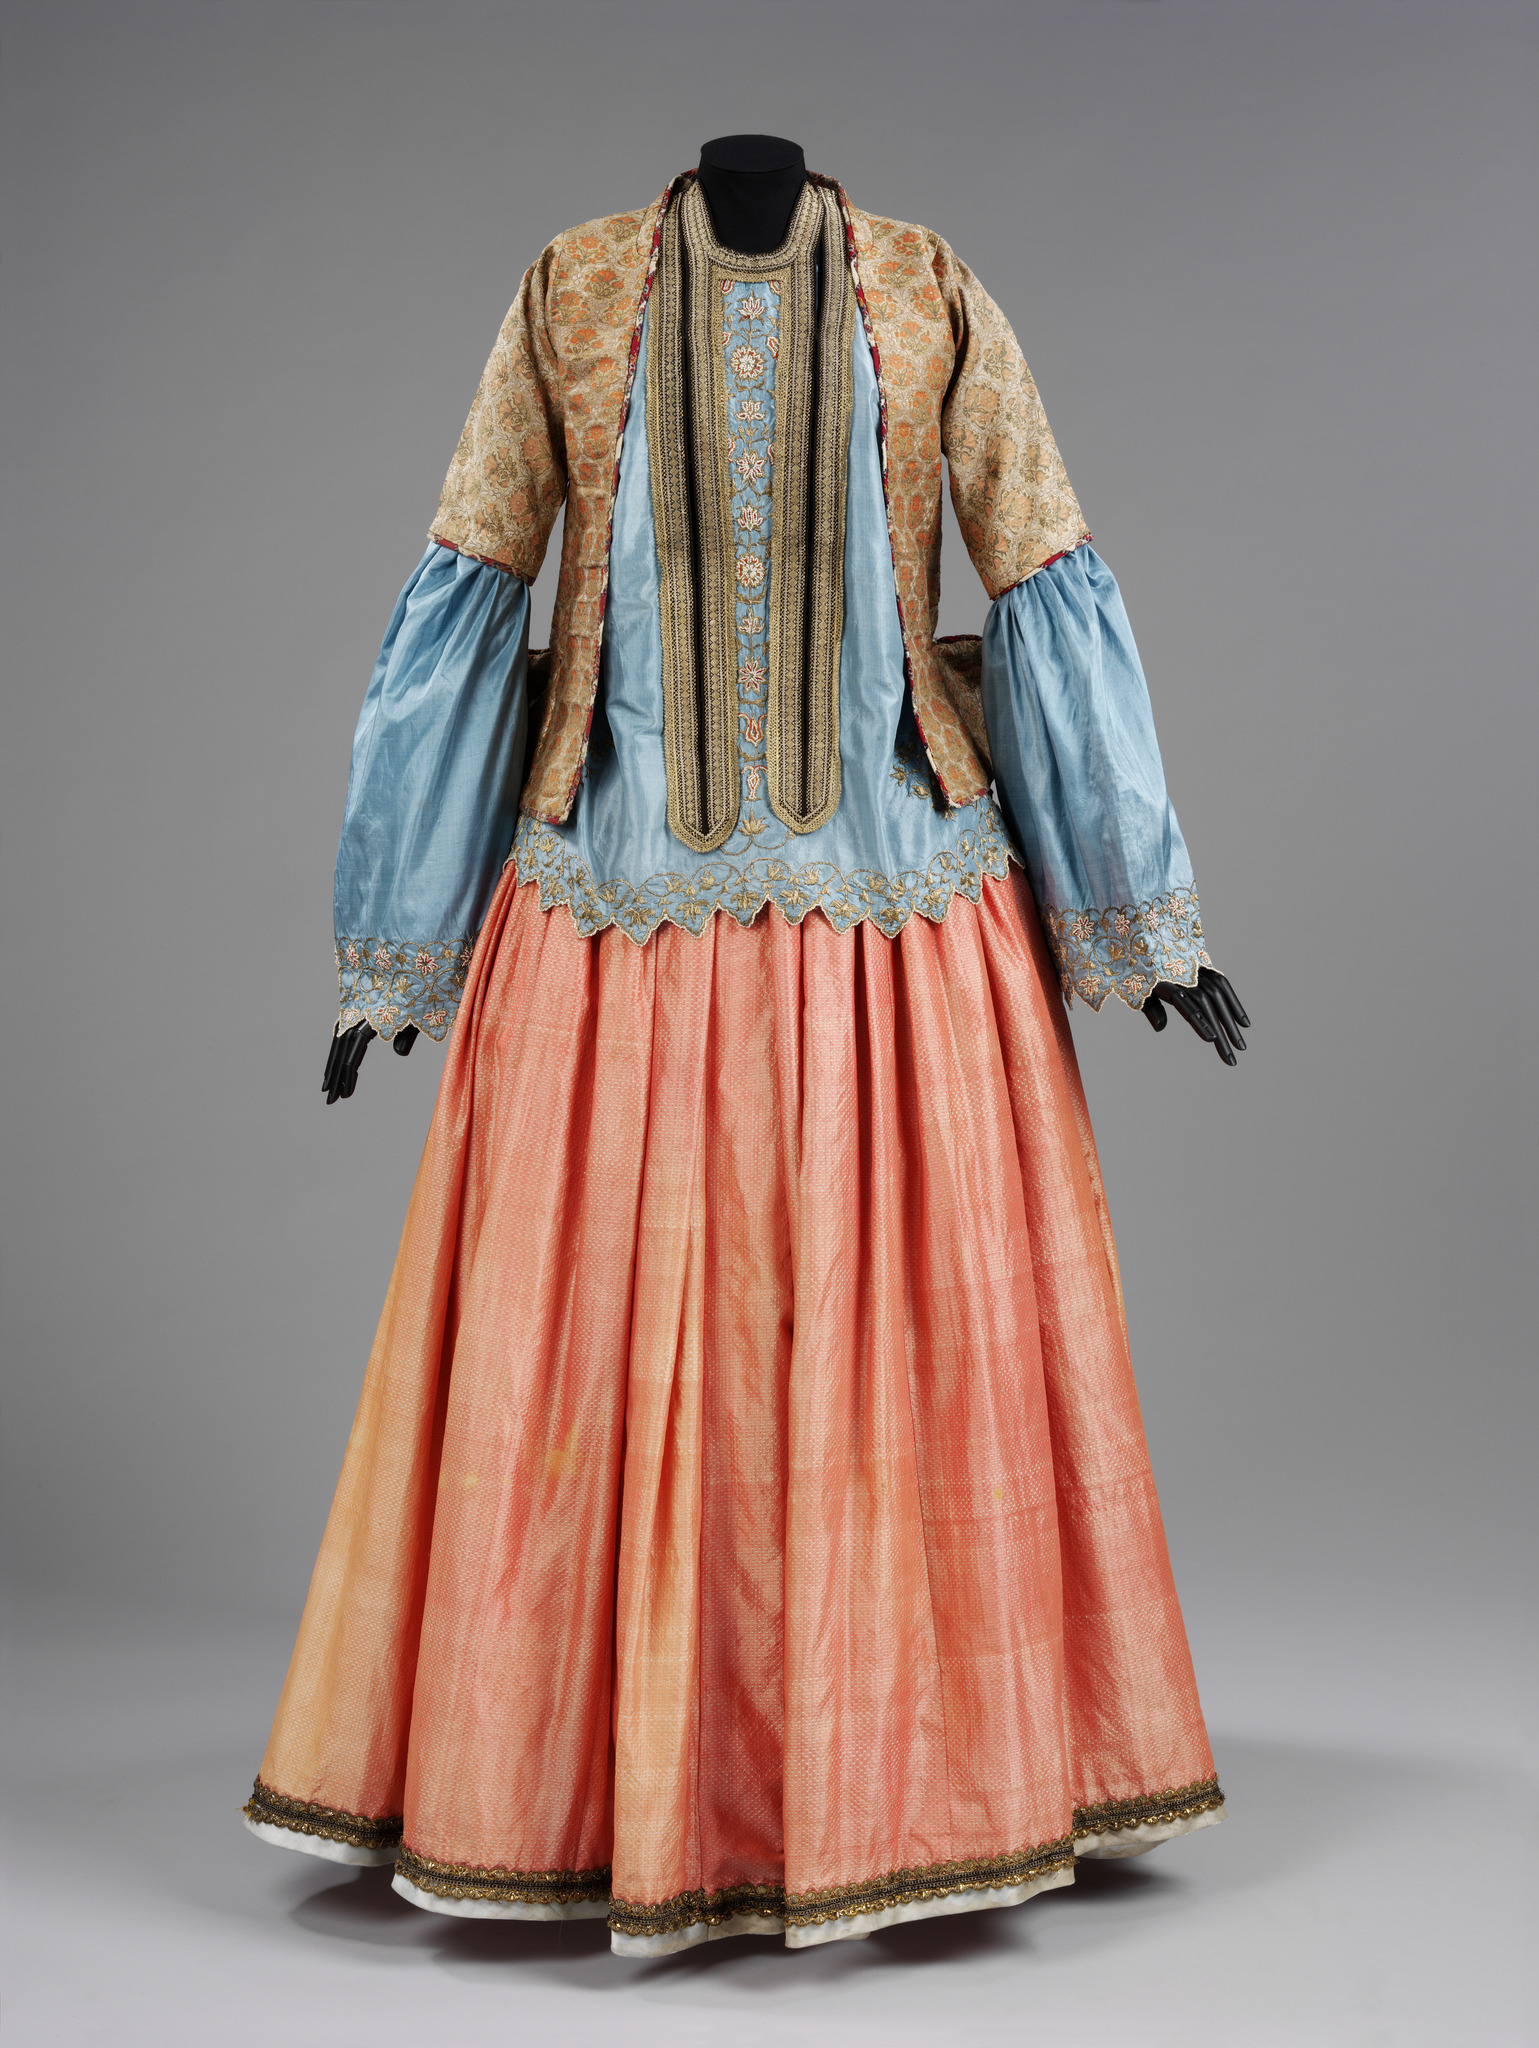 Women's jacket, blouse and skirt, 1800-1840 (c) Victoria and Albert Museum, London (2)